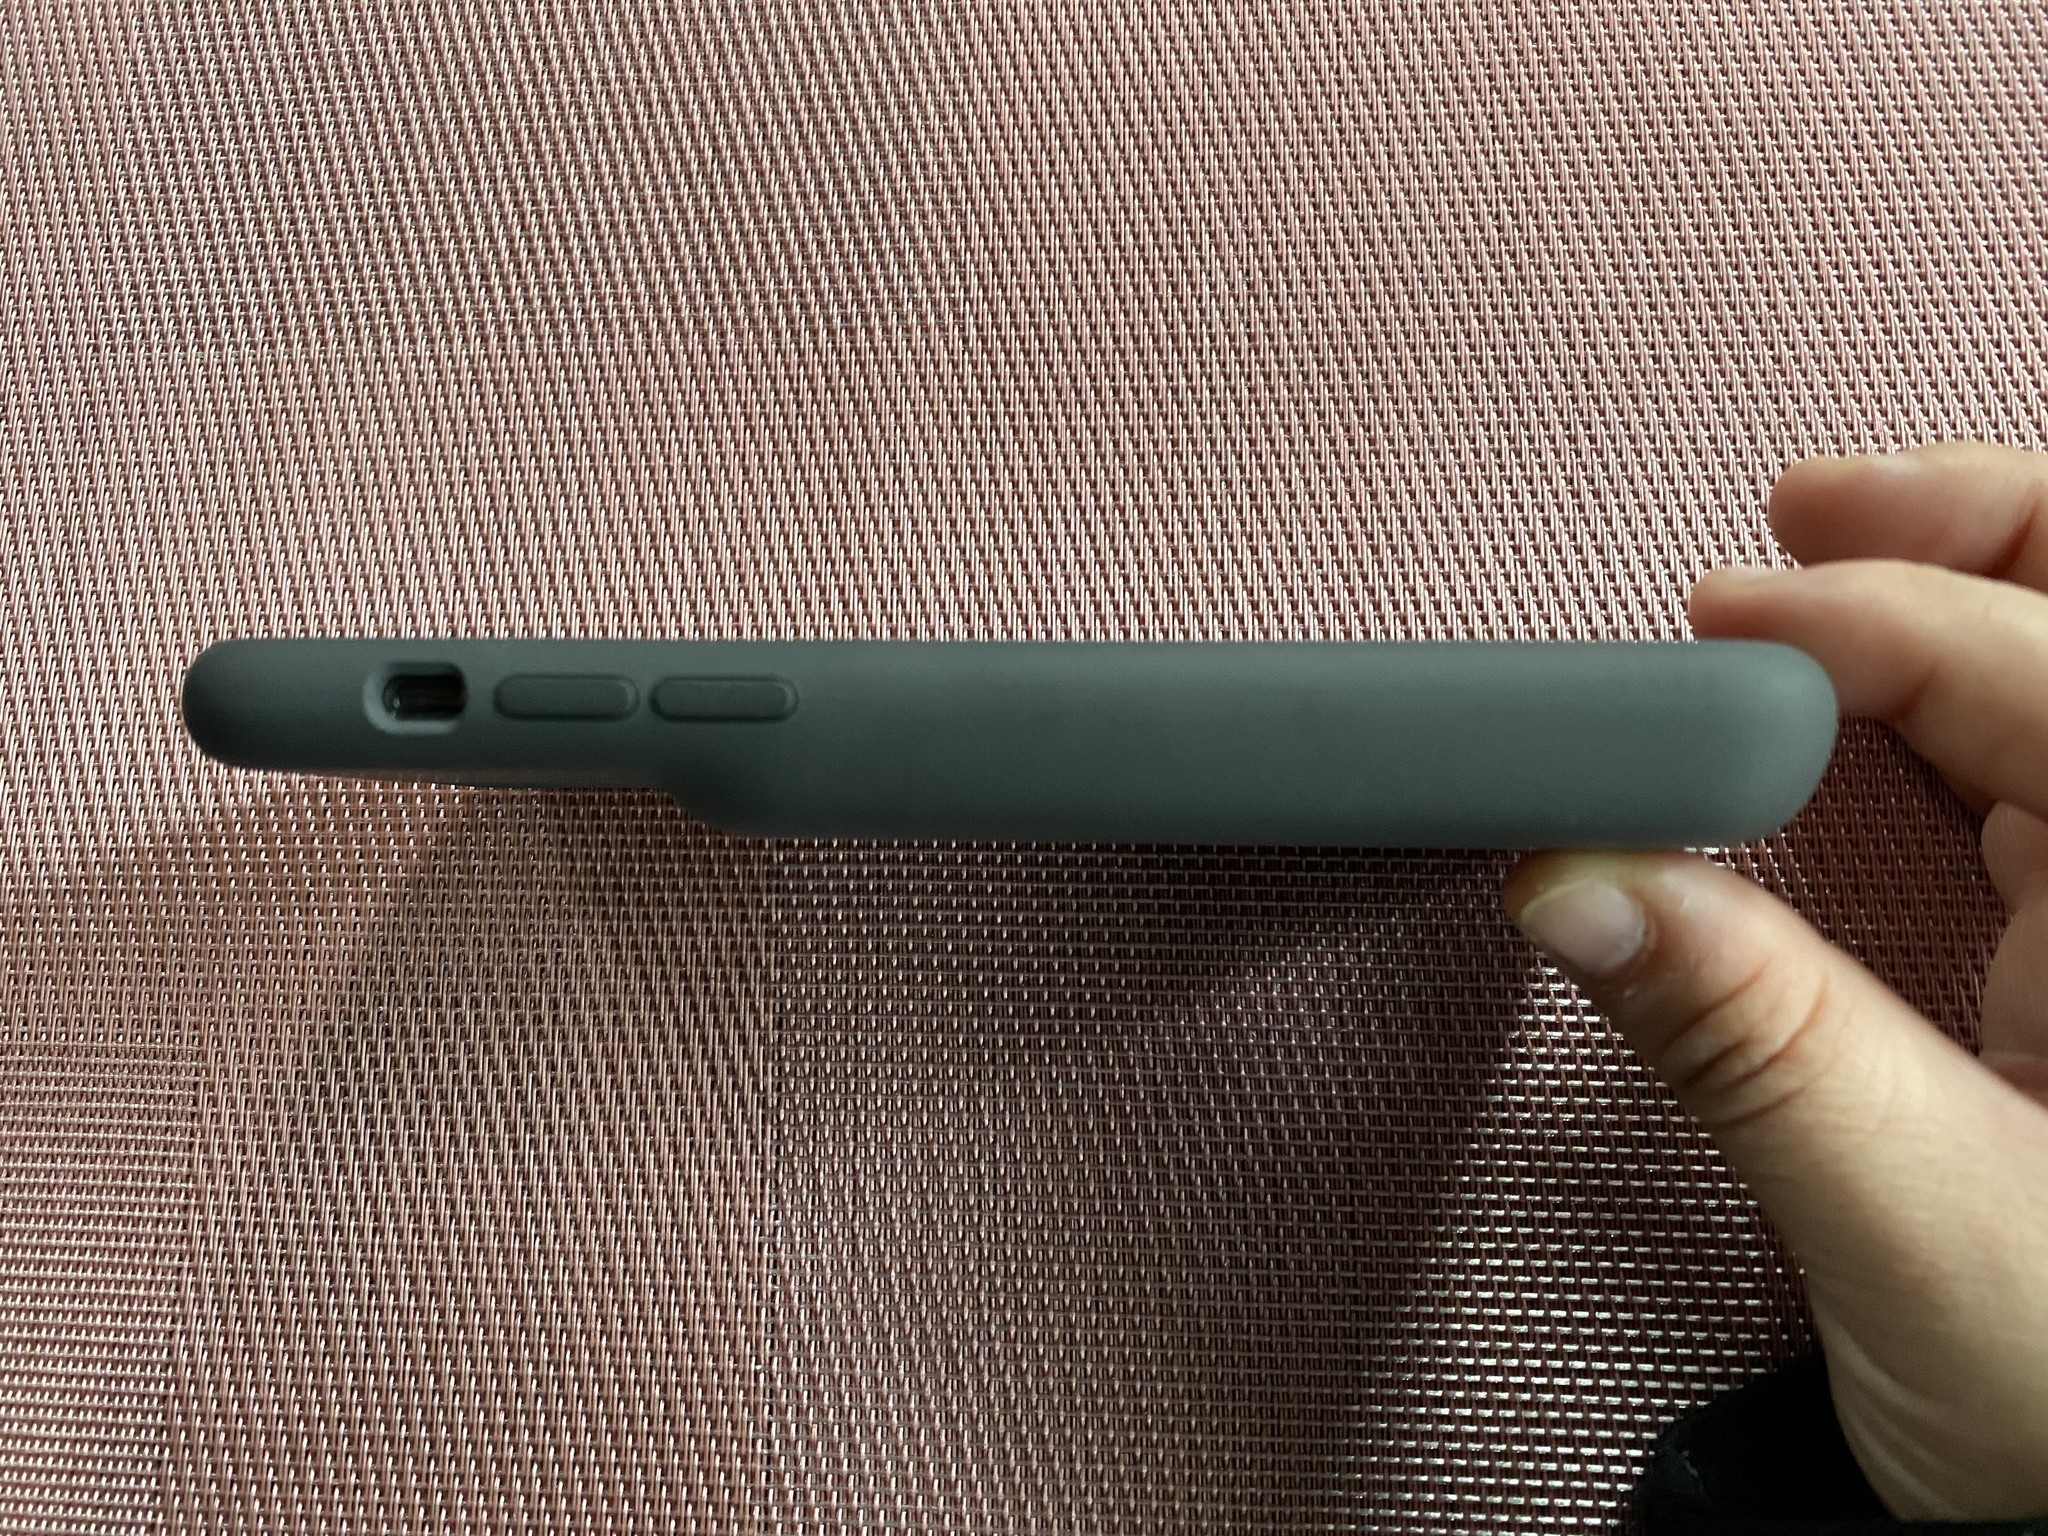 The left side of the Smart Battery Case